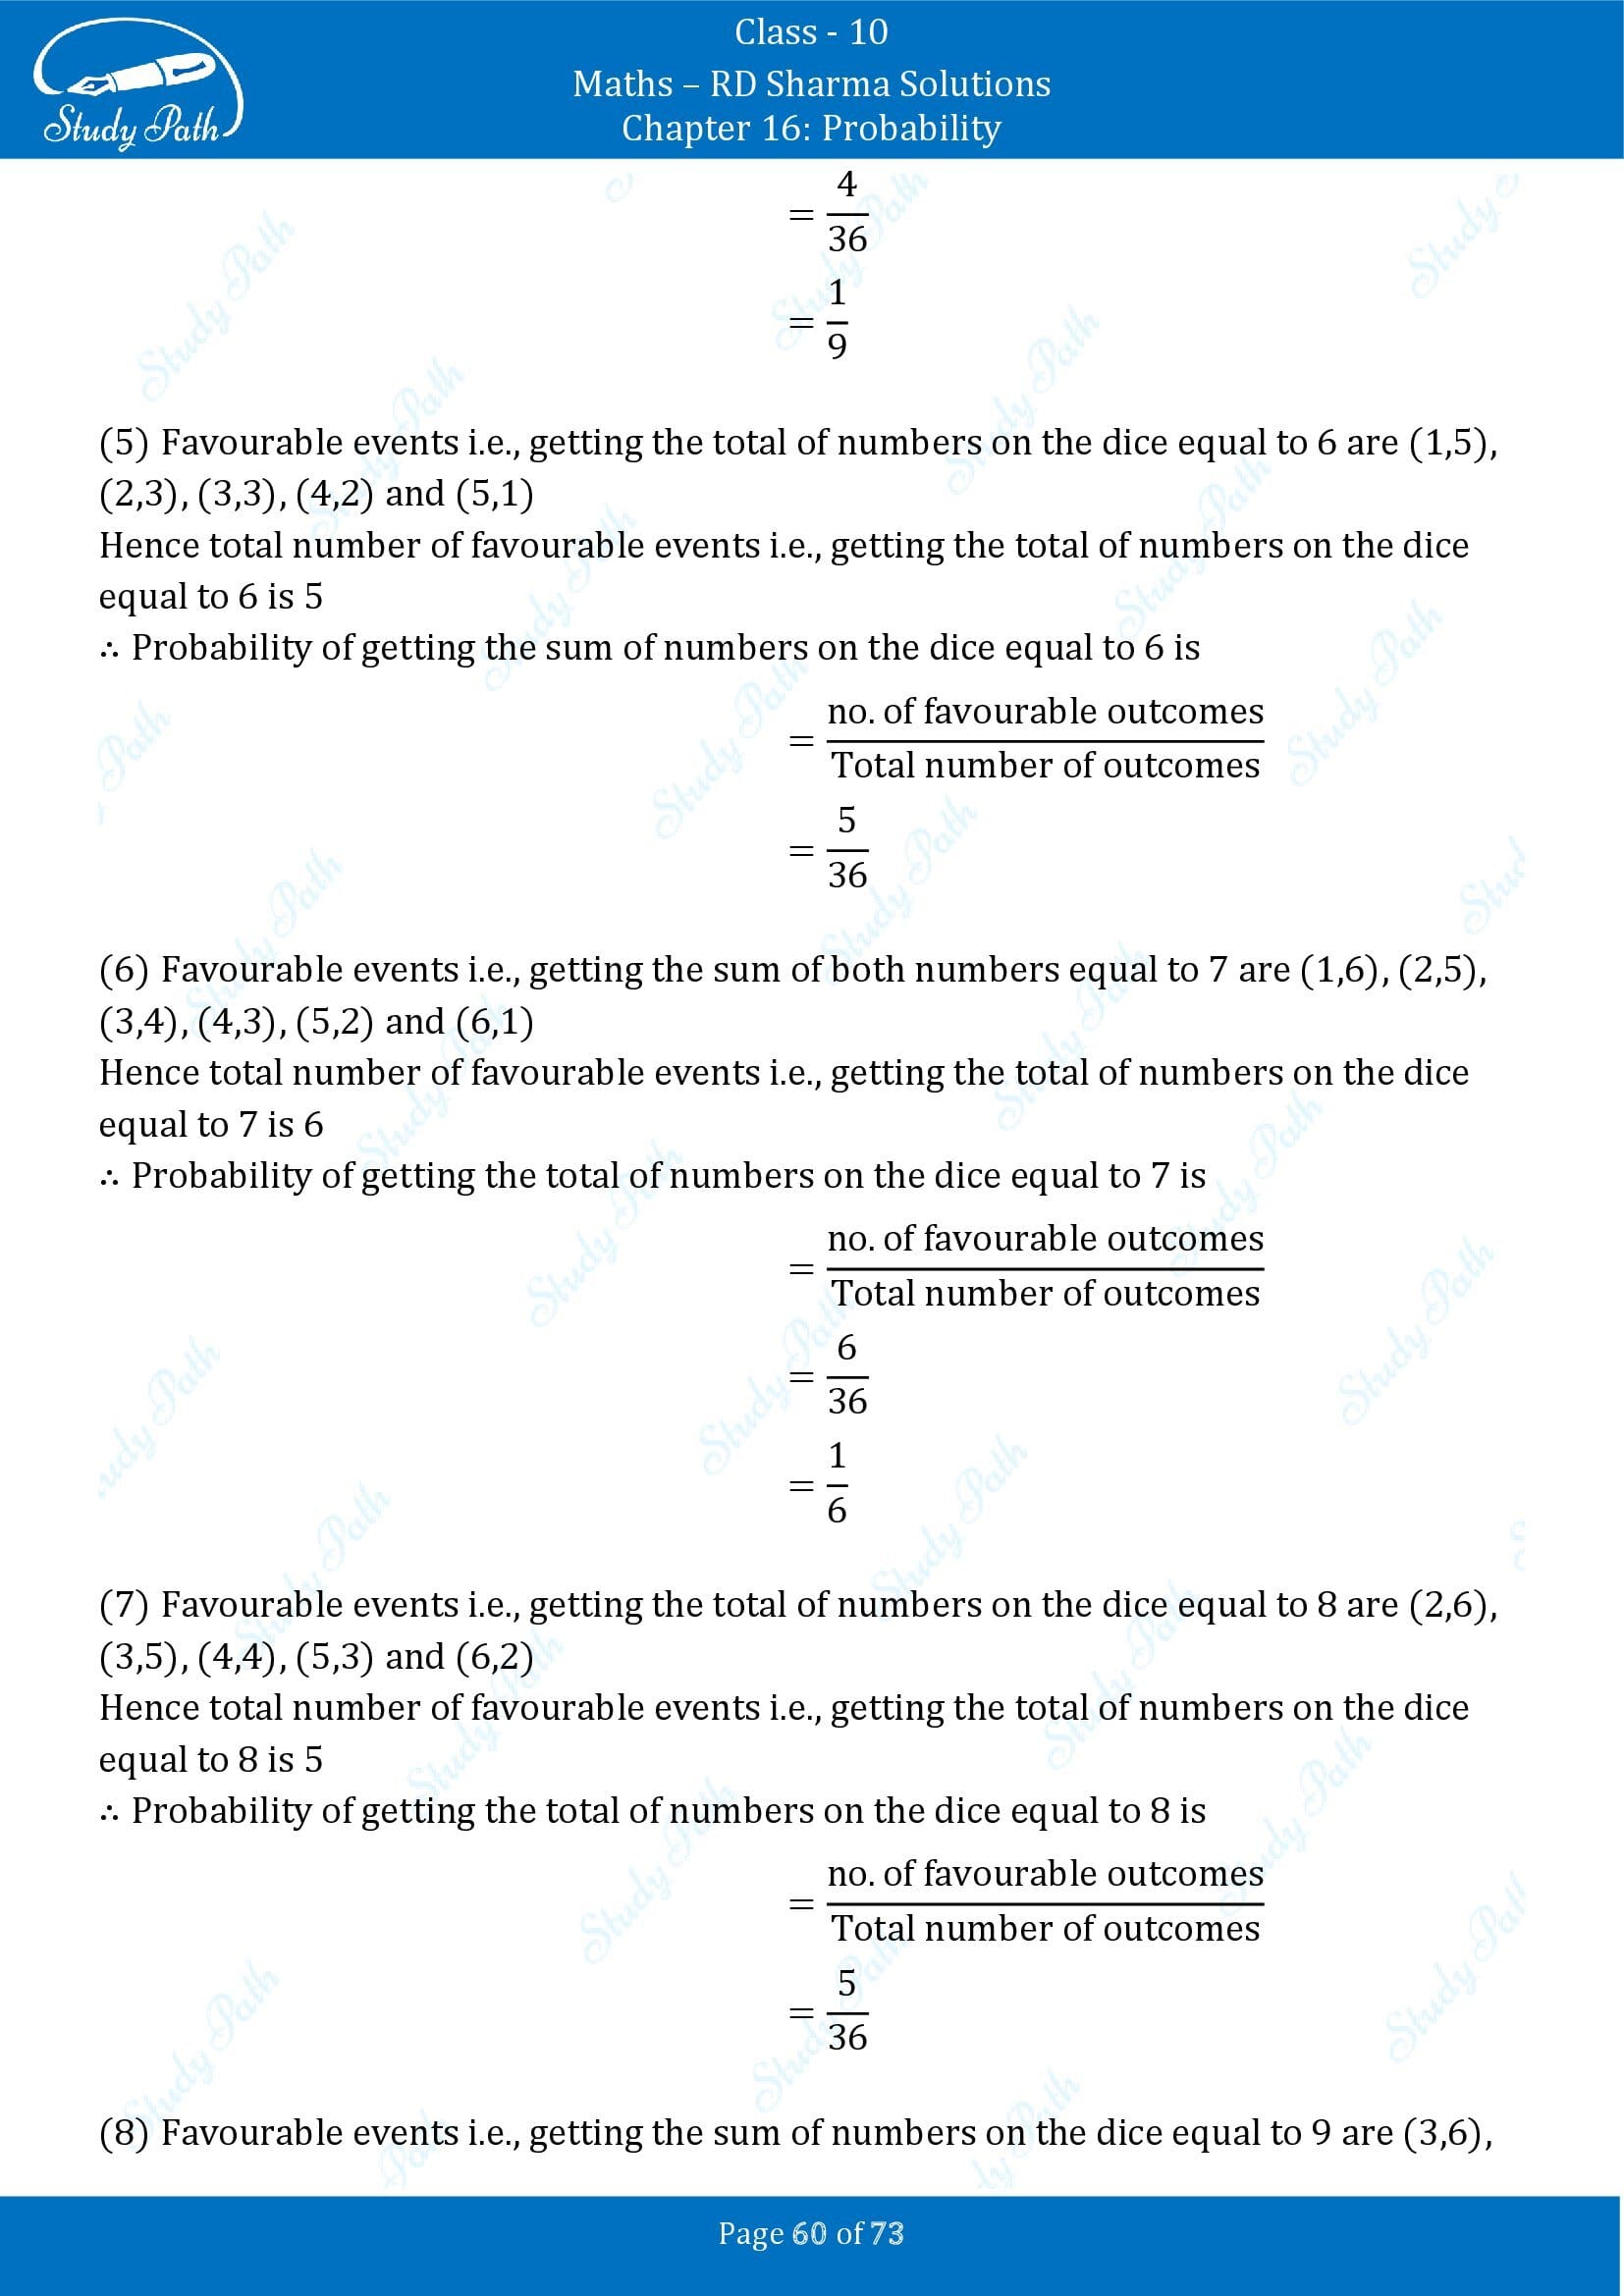 RD Sharma Solutions Class 10 Chapter 16 Probability Exercise 16.1 00060